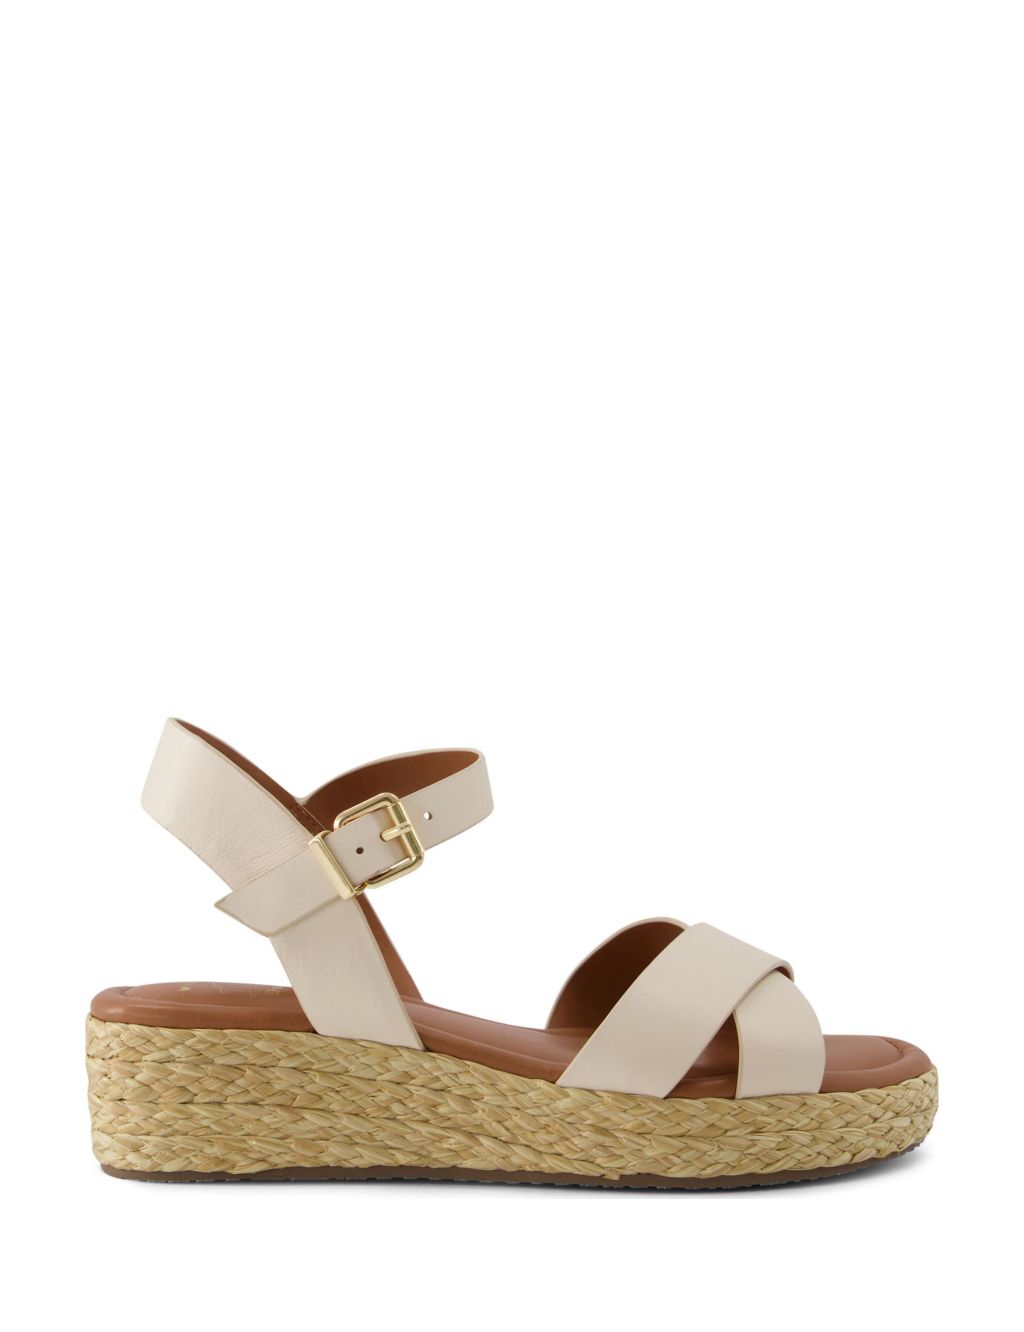 Wide Fit Leather Wedge Espadrilles